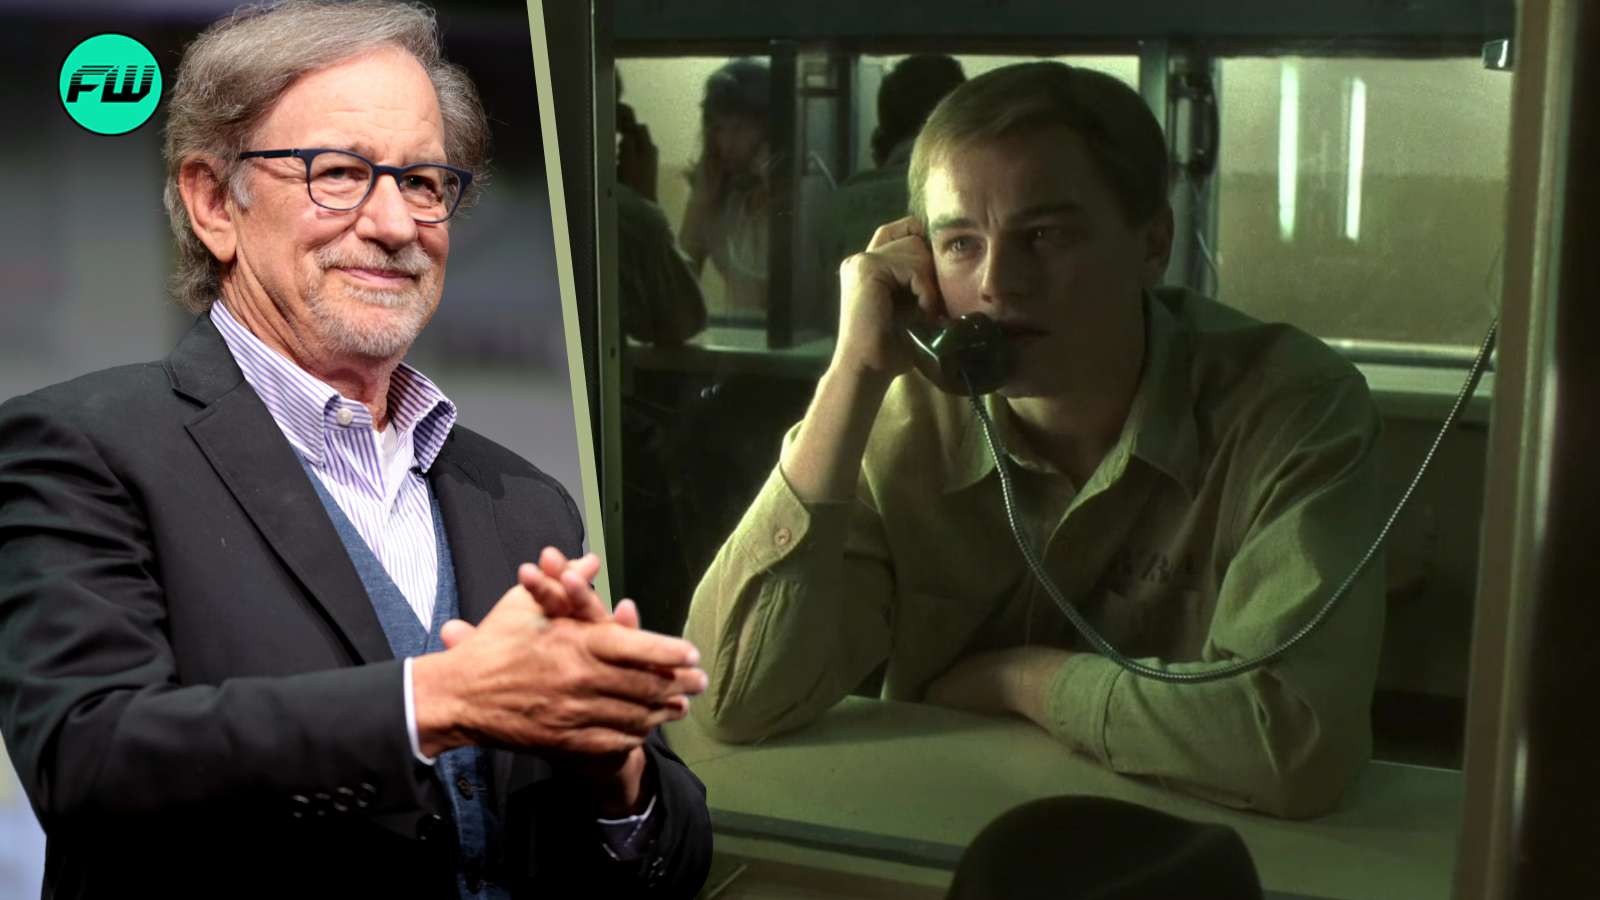 Steven Spielberg and Leonardo DiCaprio Catch Me If You Can